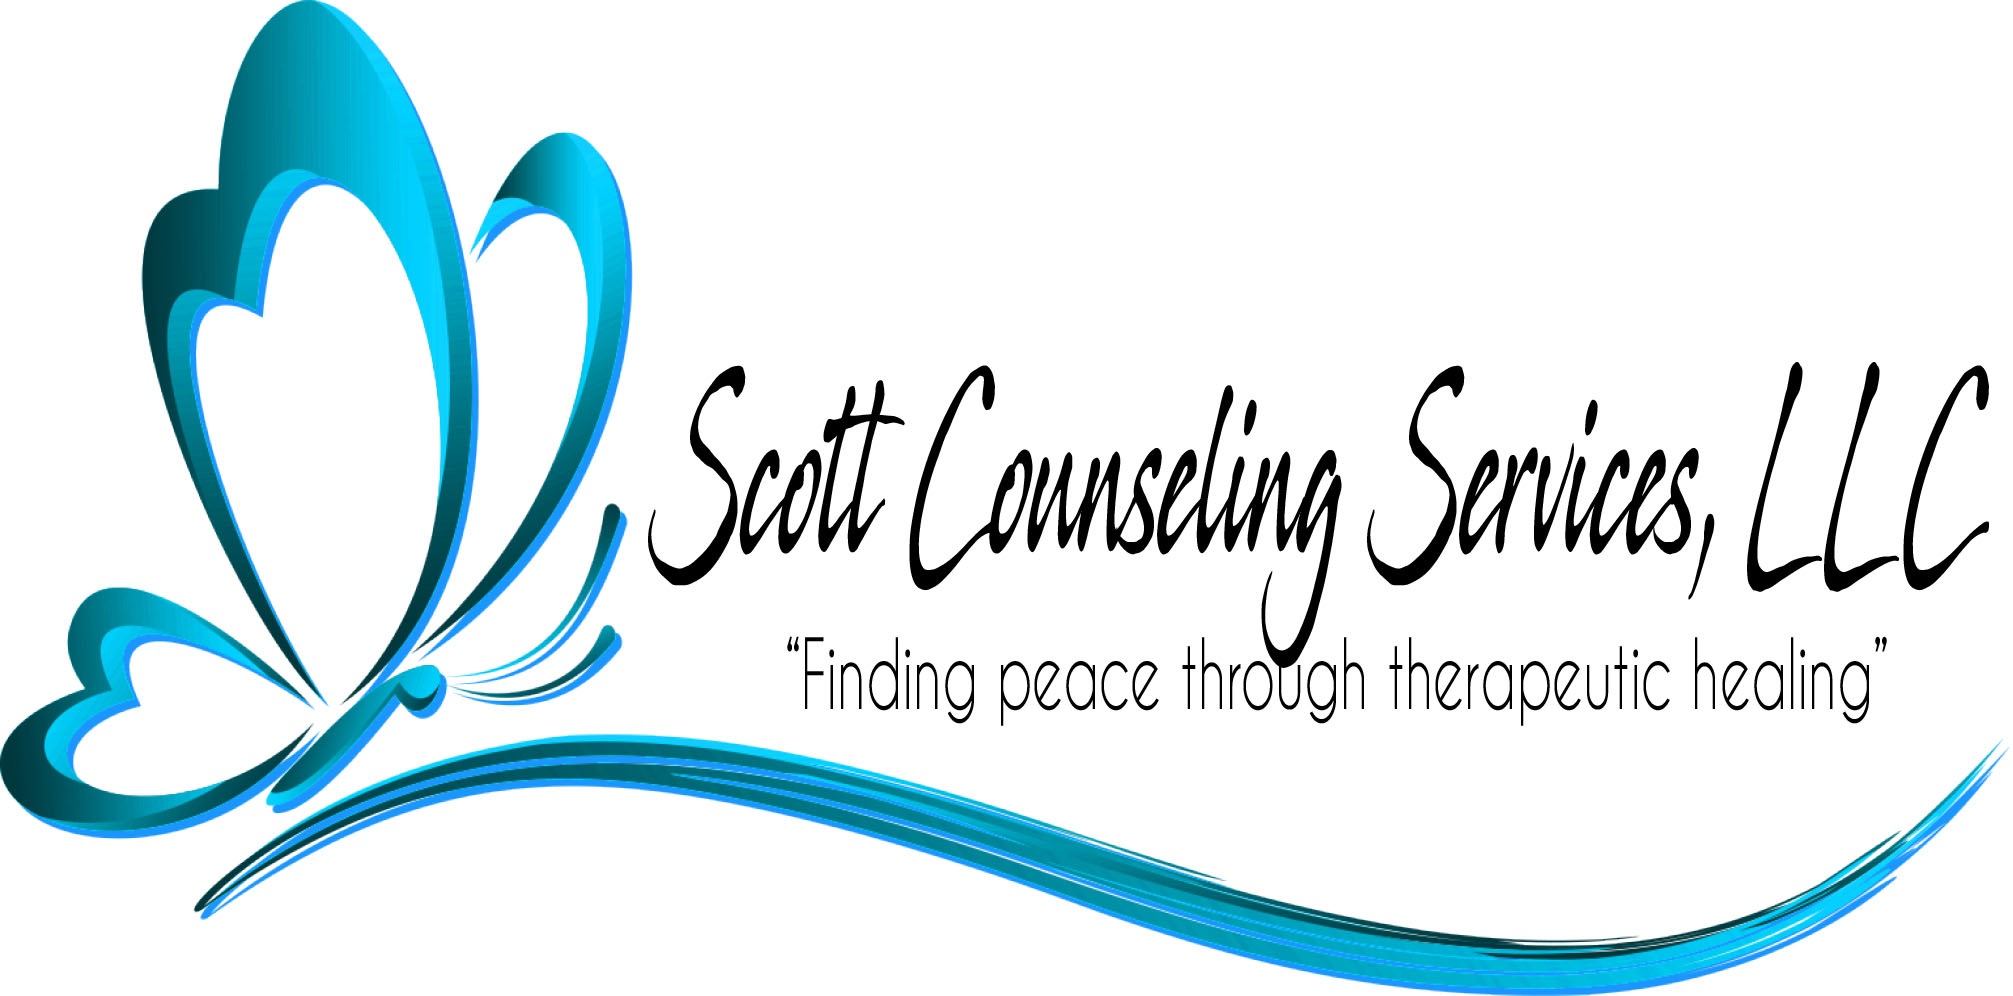 Scott Counseling Services